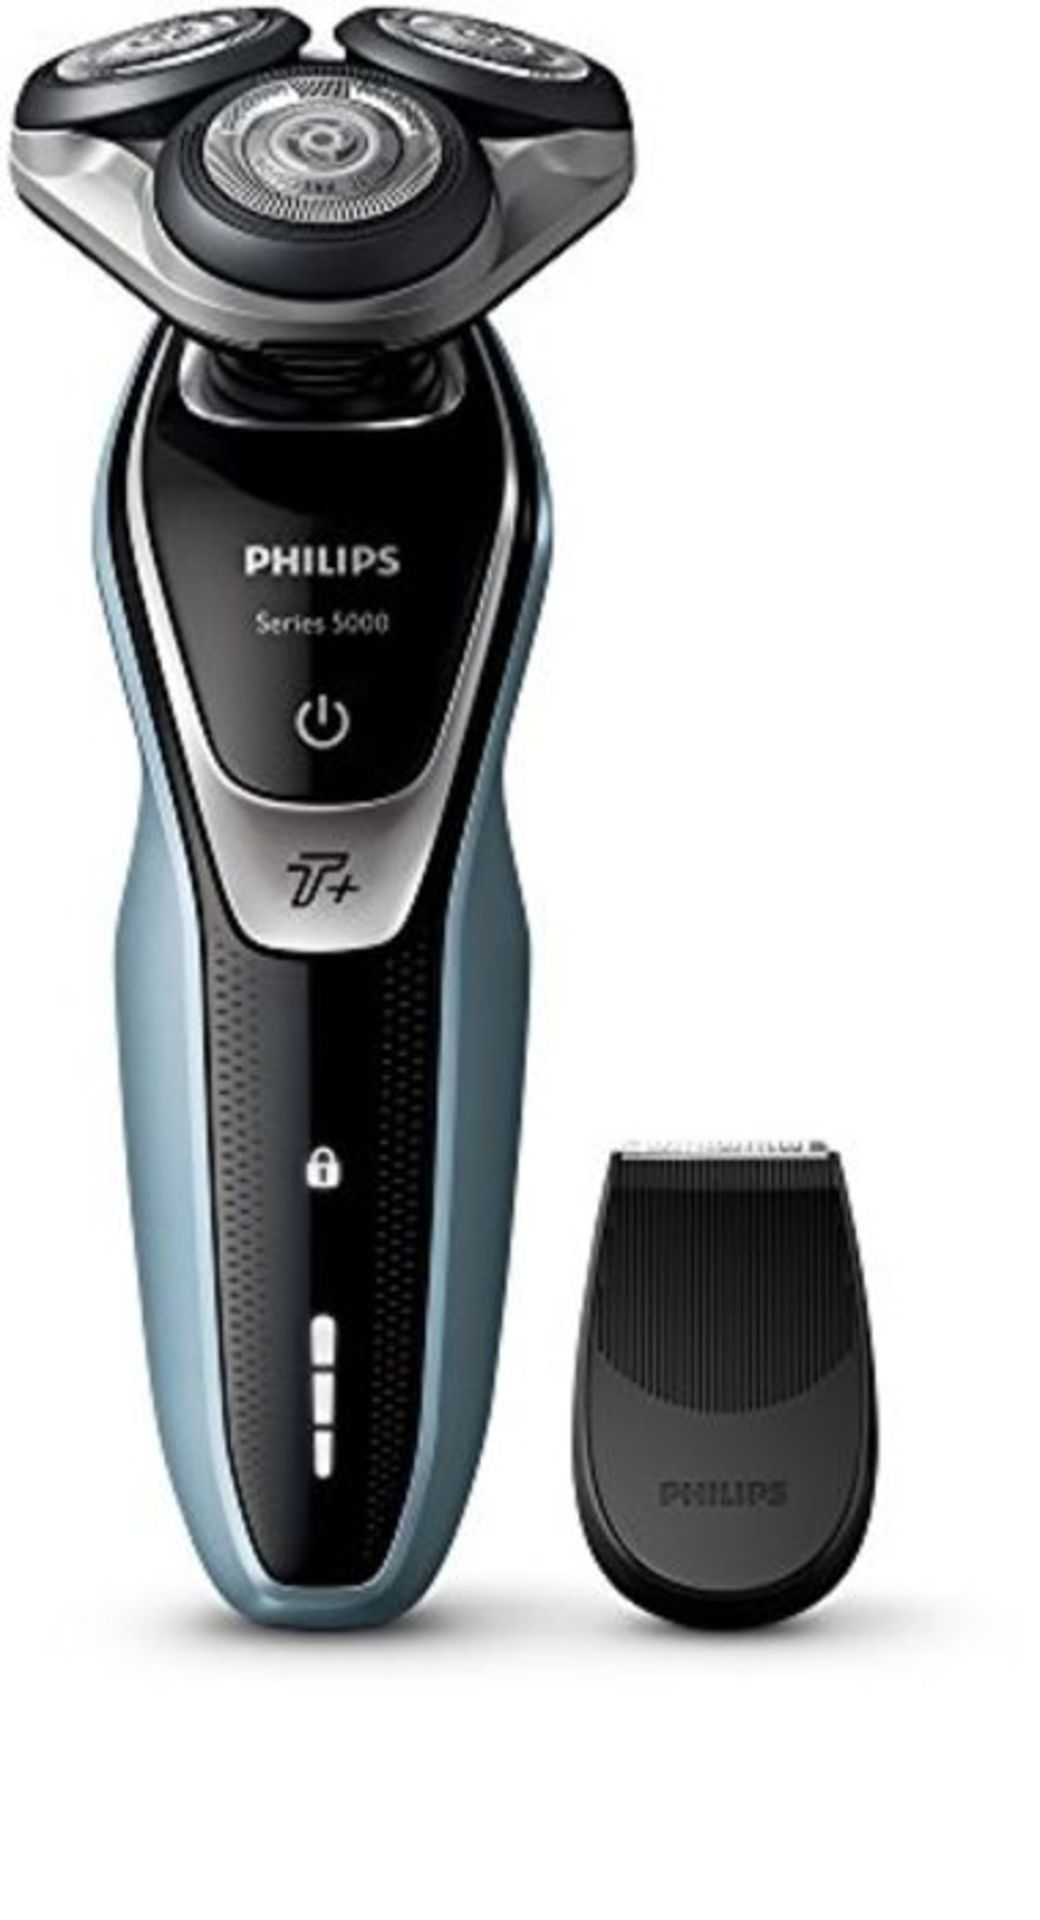 RRP £75.00 Philips Series 5000 S5530/06 Wet and Dry Men's Electric Shaver with Turbo Plus Mode